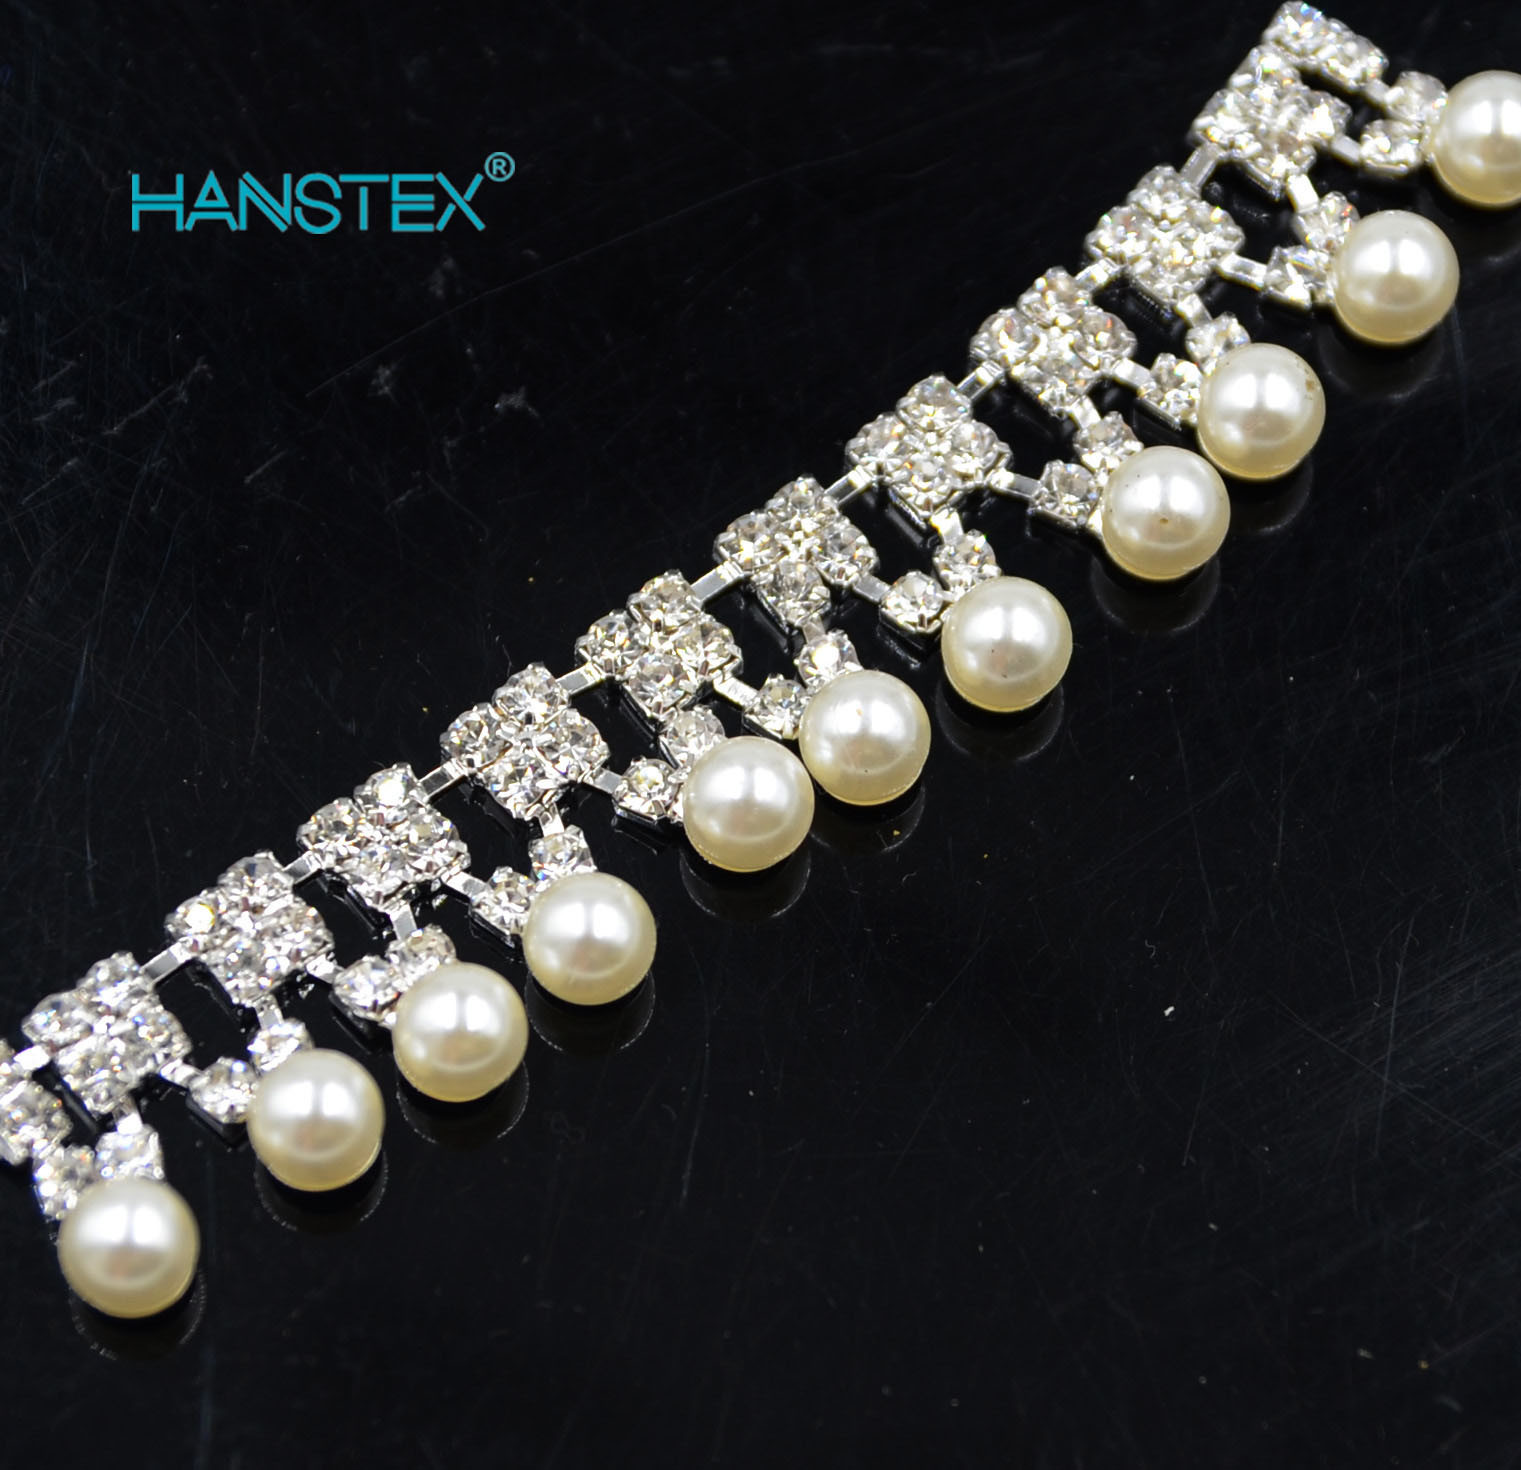 New Arrival Fashion Metal Crystal Diamond Rhinestone Cup Chain for Clothings